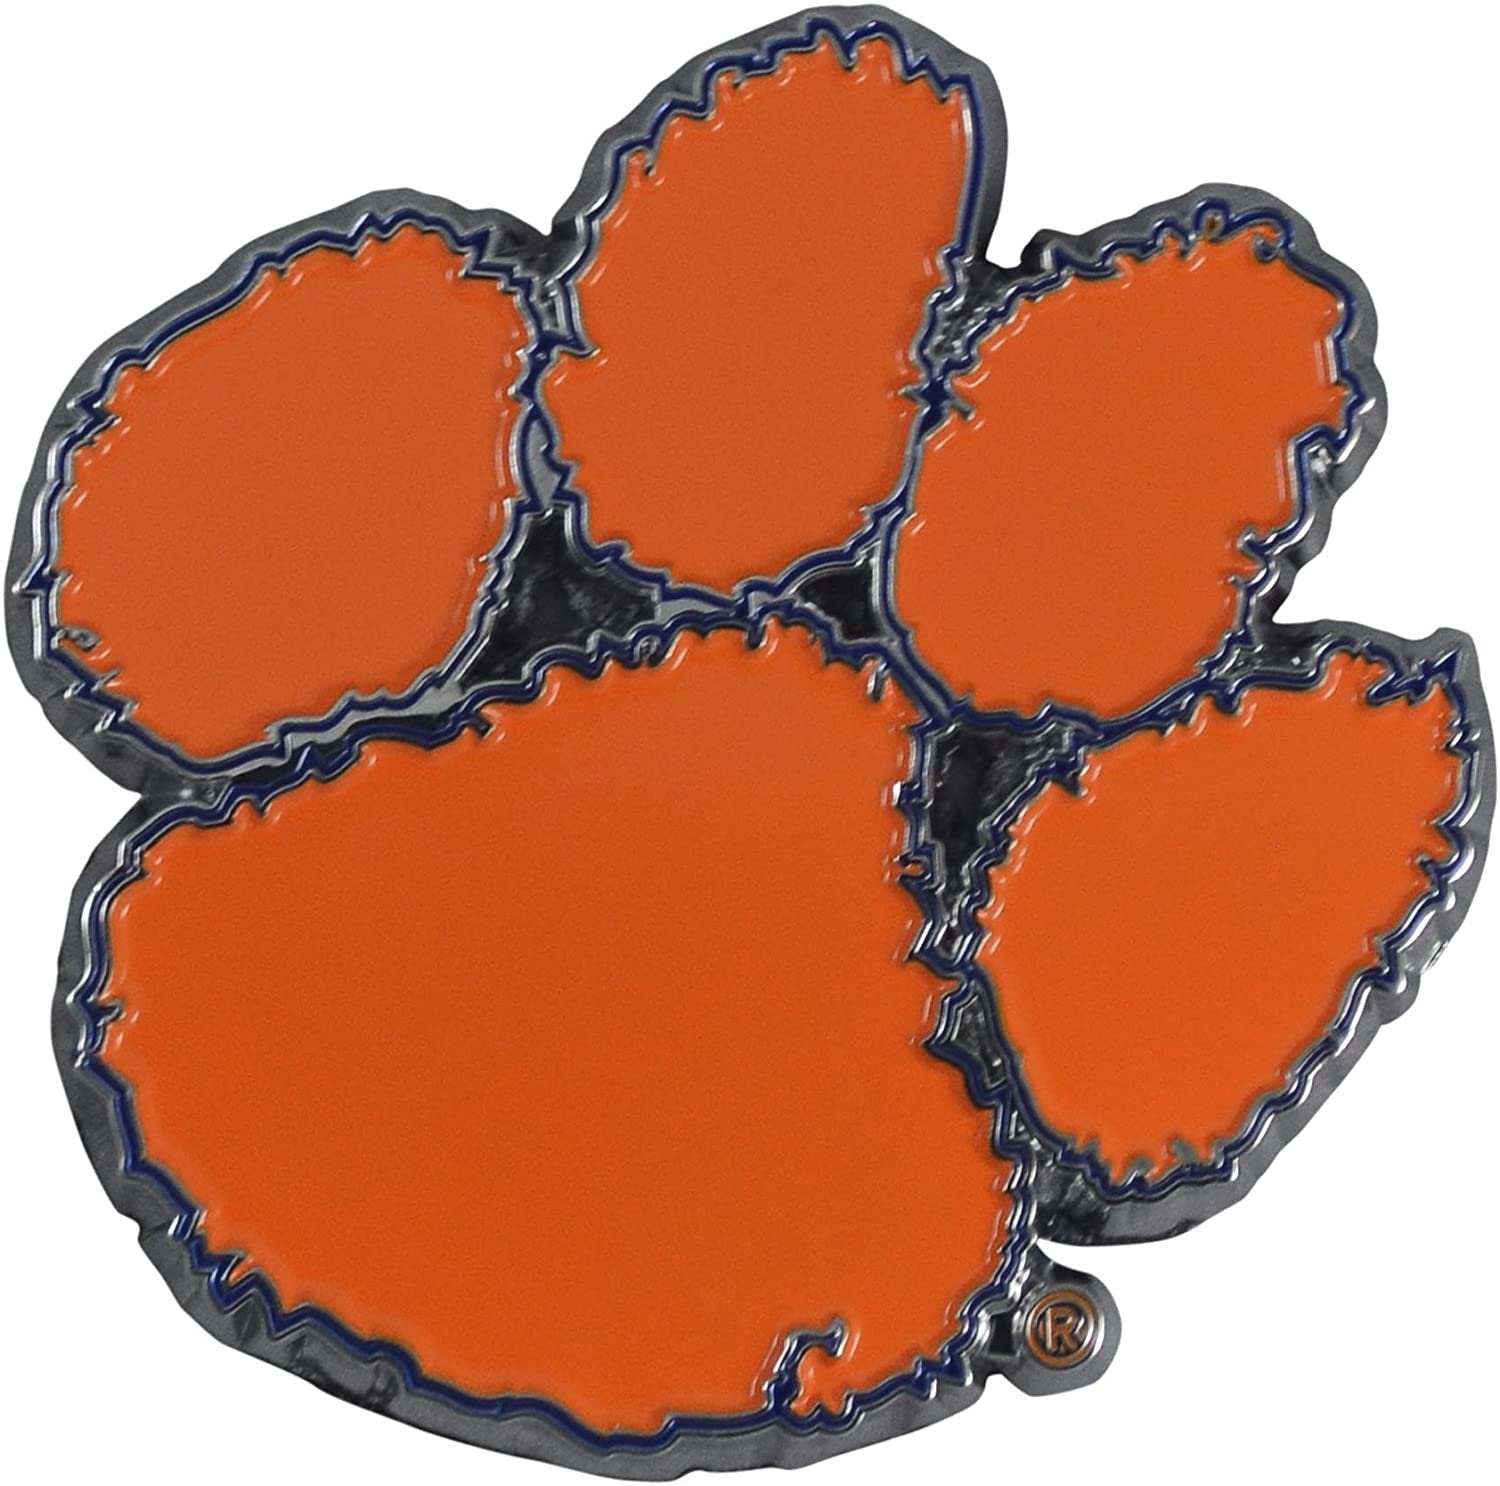 Clemson University Tigers Solid Metal Color Auto Emblem Raised Decal Adhesive Tape Backing